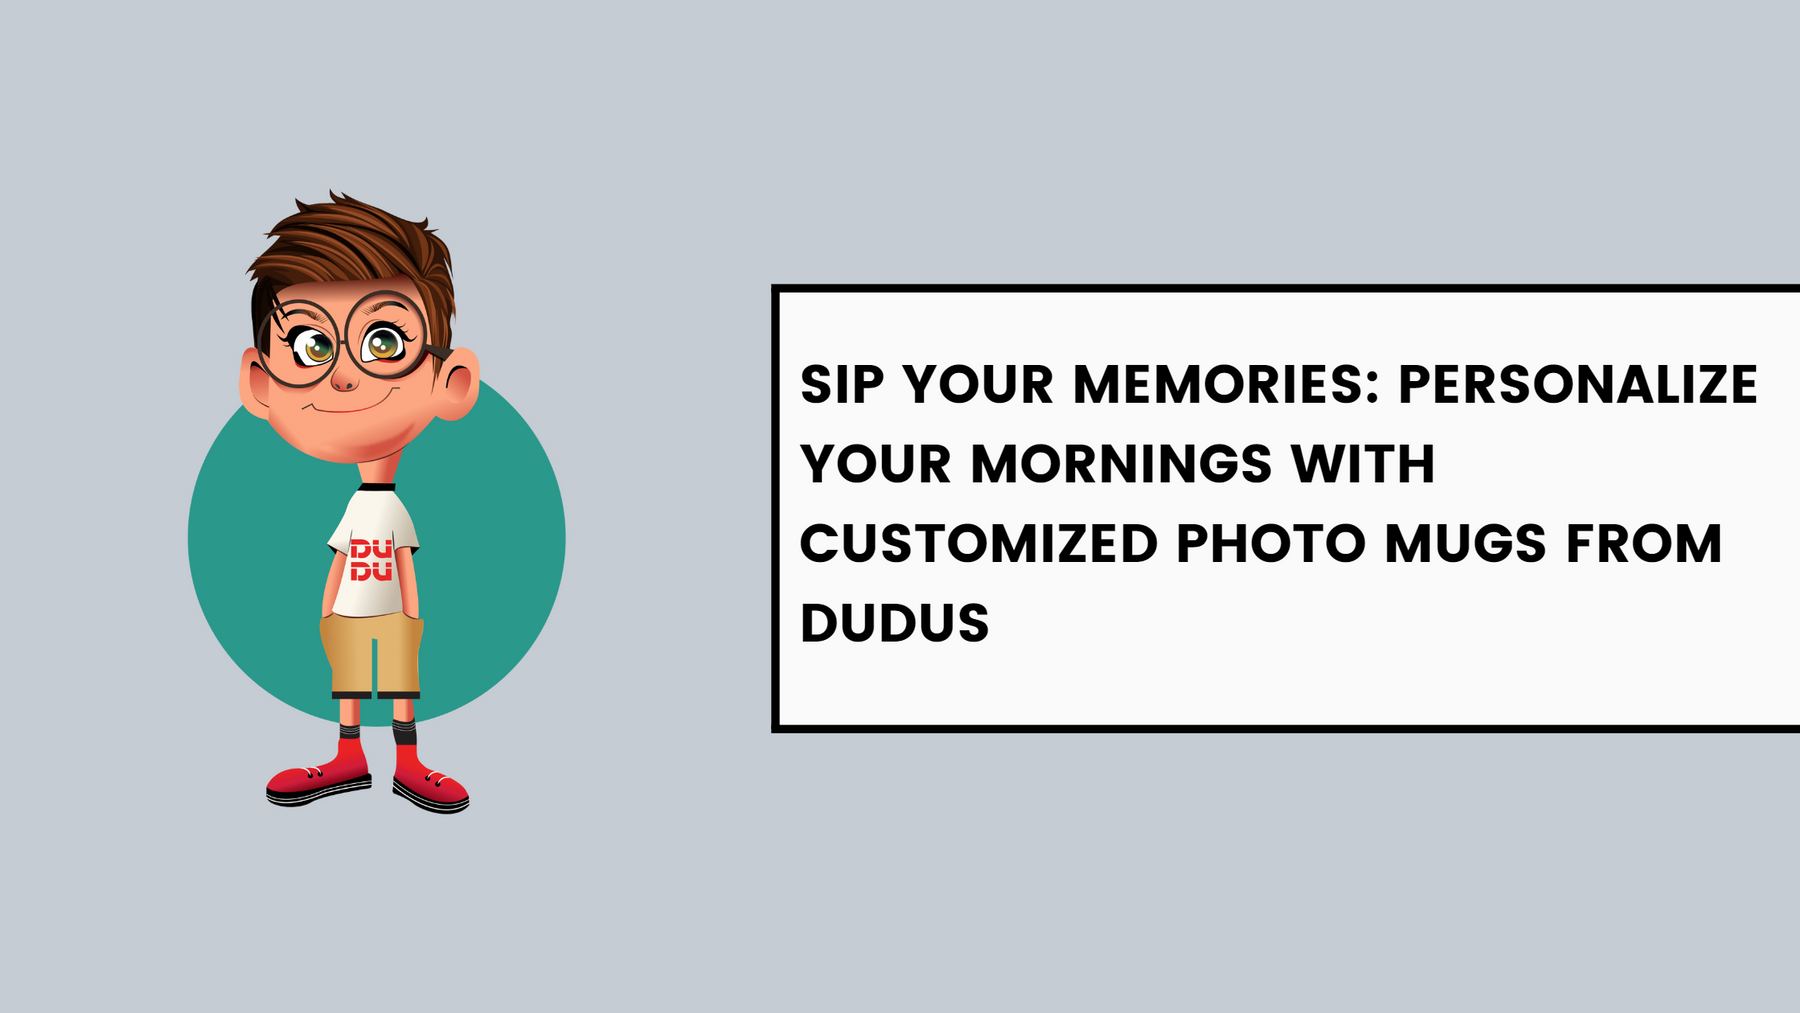 Sip Your Memories: Personalize Your Mornings with Customized Photo Mugs from Dudus